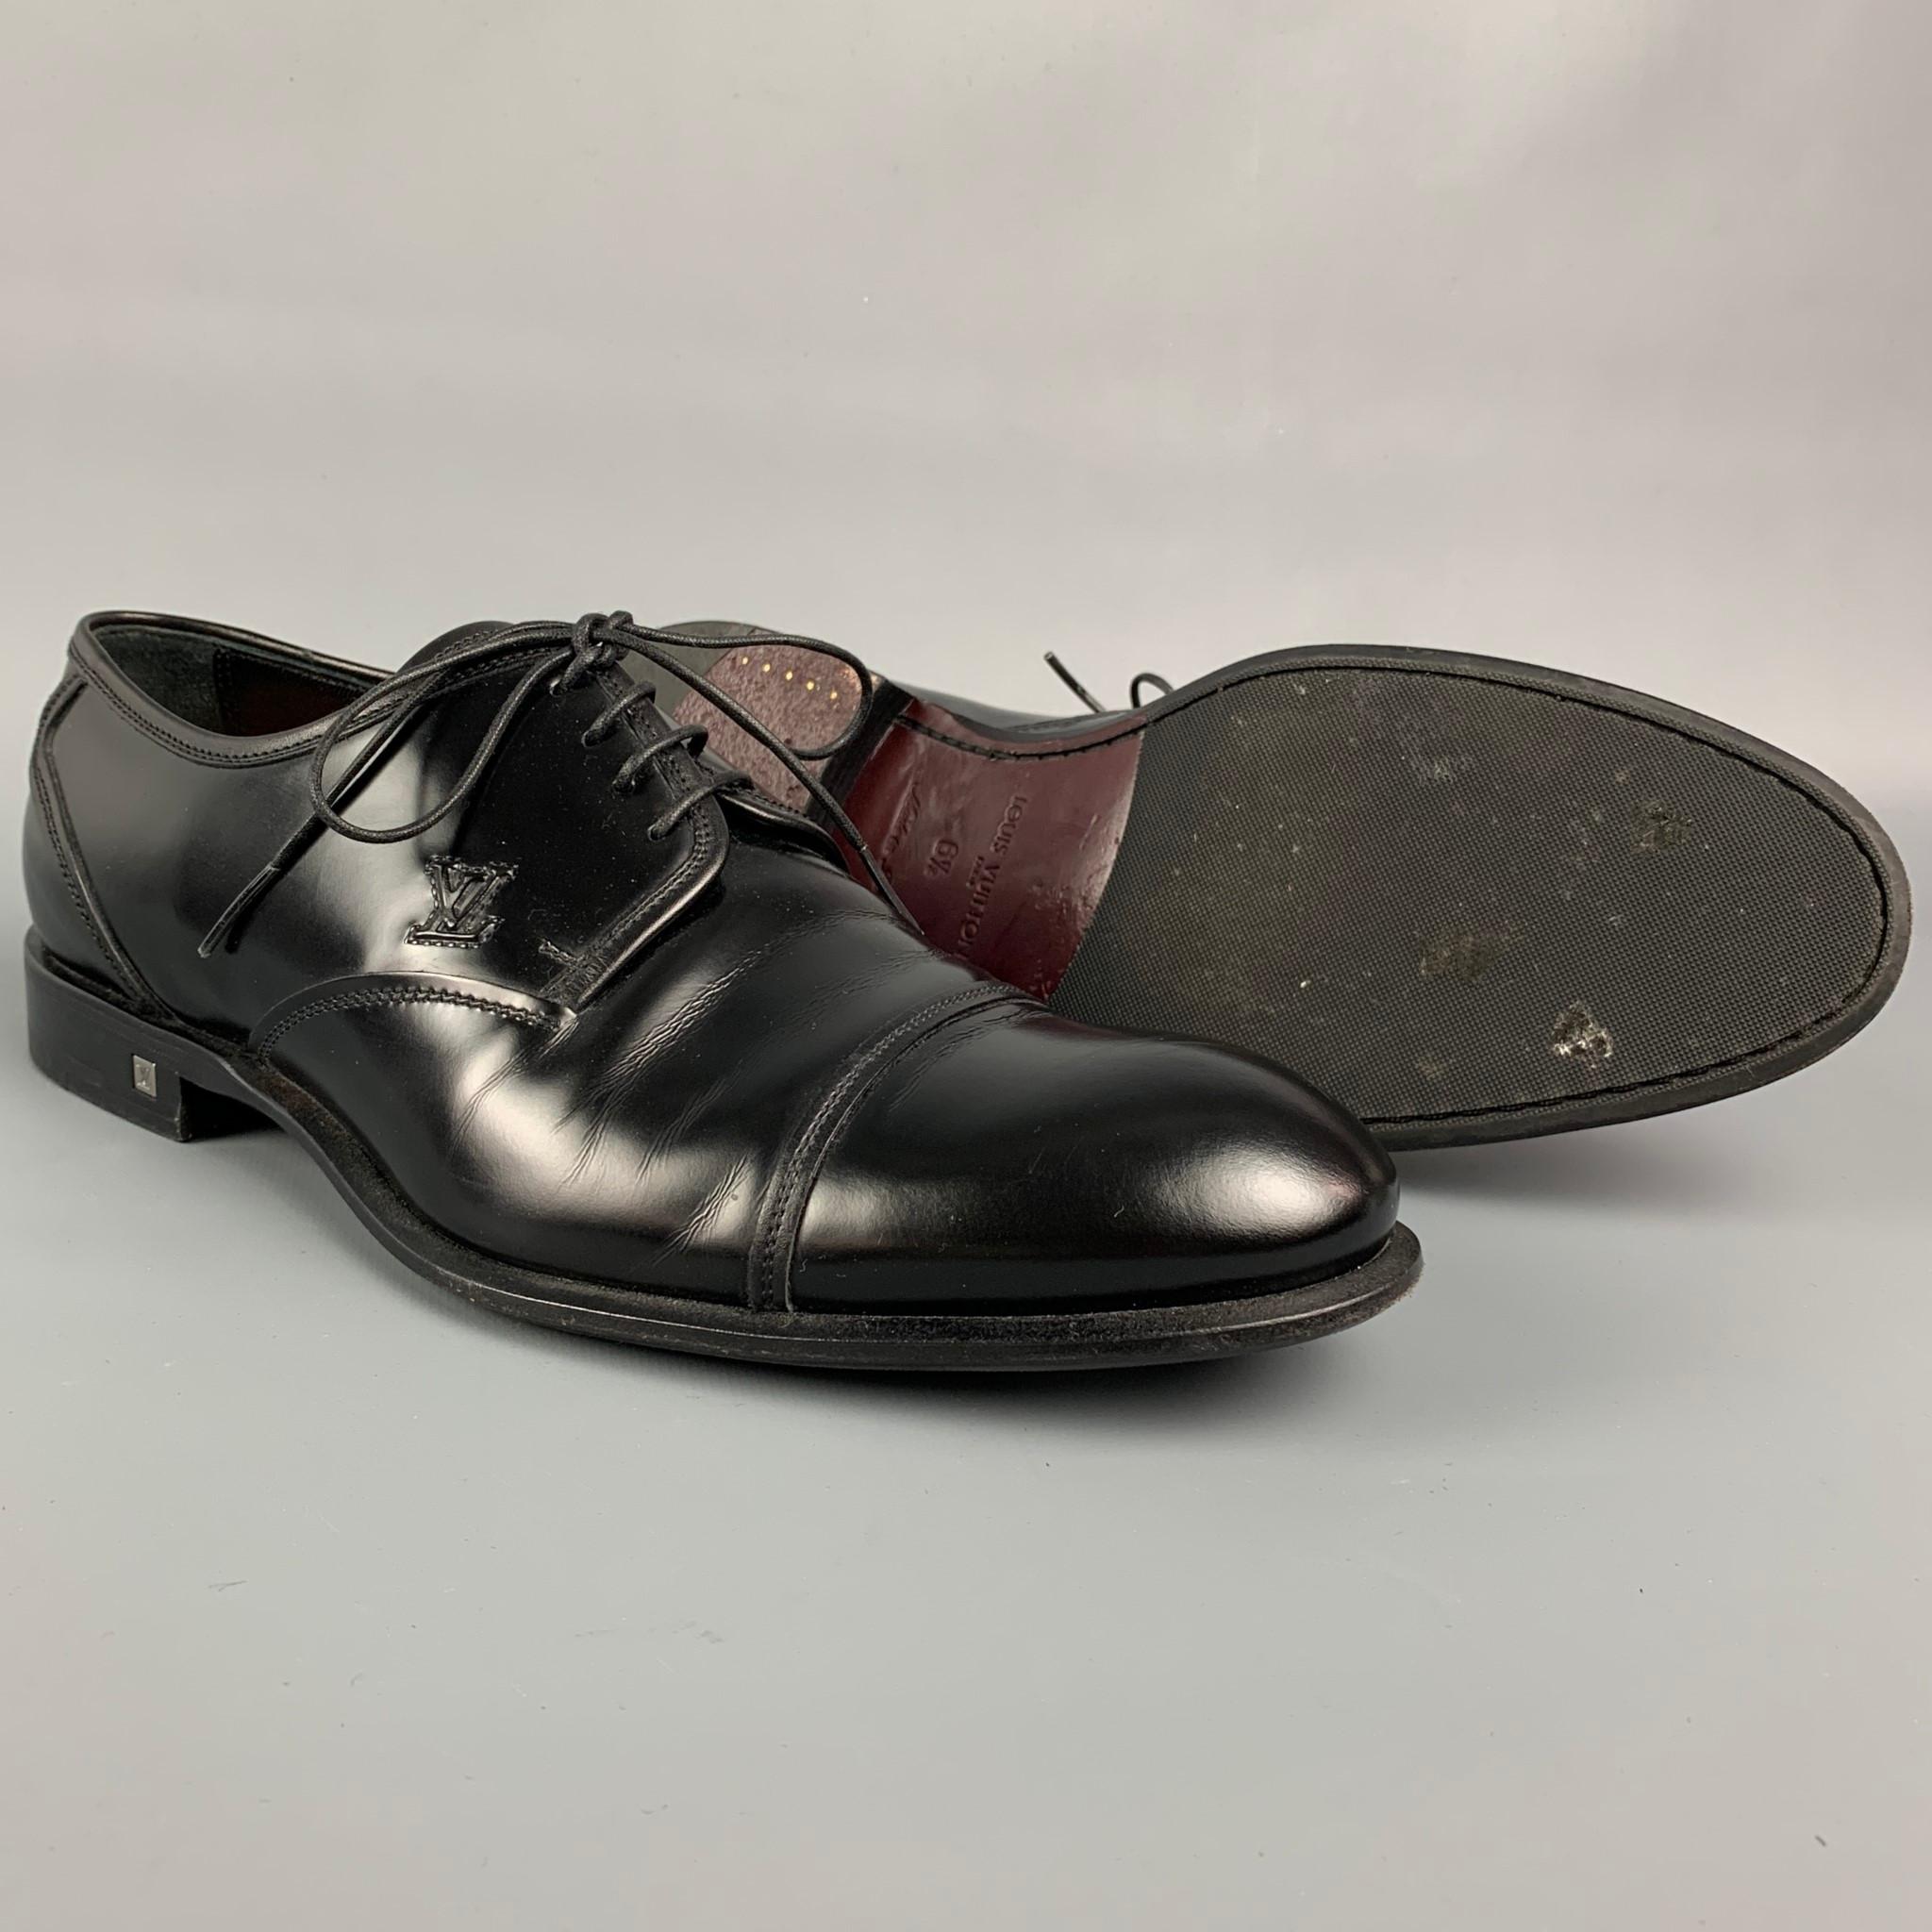 LOUIS VUITTON shoes comes in a black patent leather featuring a cap toe, embossed logo detail, silver tone hardware logo, stacked heel, and a lace up closure. Made in Italy.

Good Pre-Owned Condition. Minor wear at front.
Marked: ST0122 /